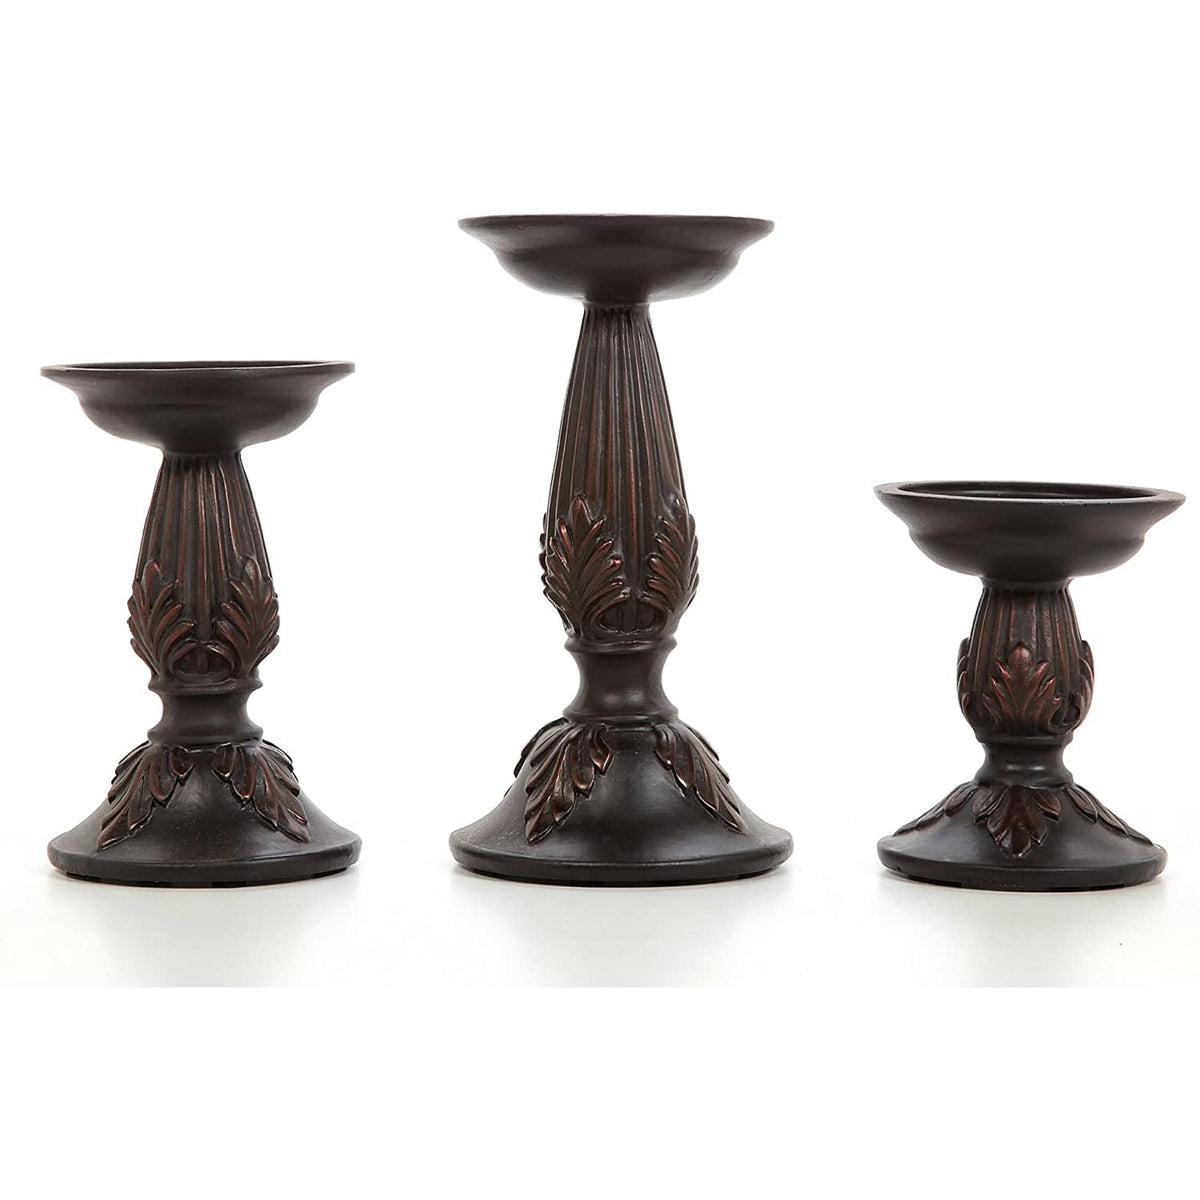 HOSLEY®  Resin Pillar Candle Holders, Brown Finish, Set of 3, 8" 6" &  4.5" High